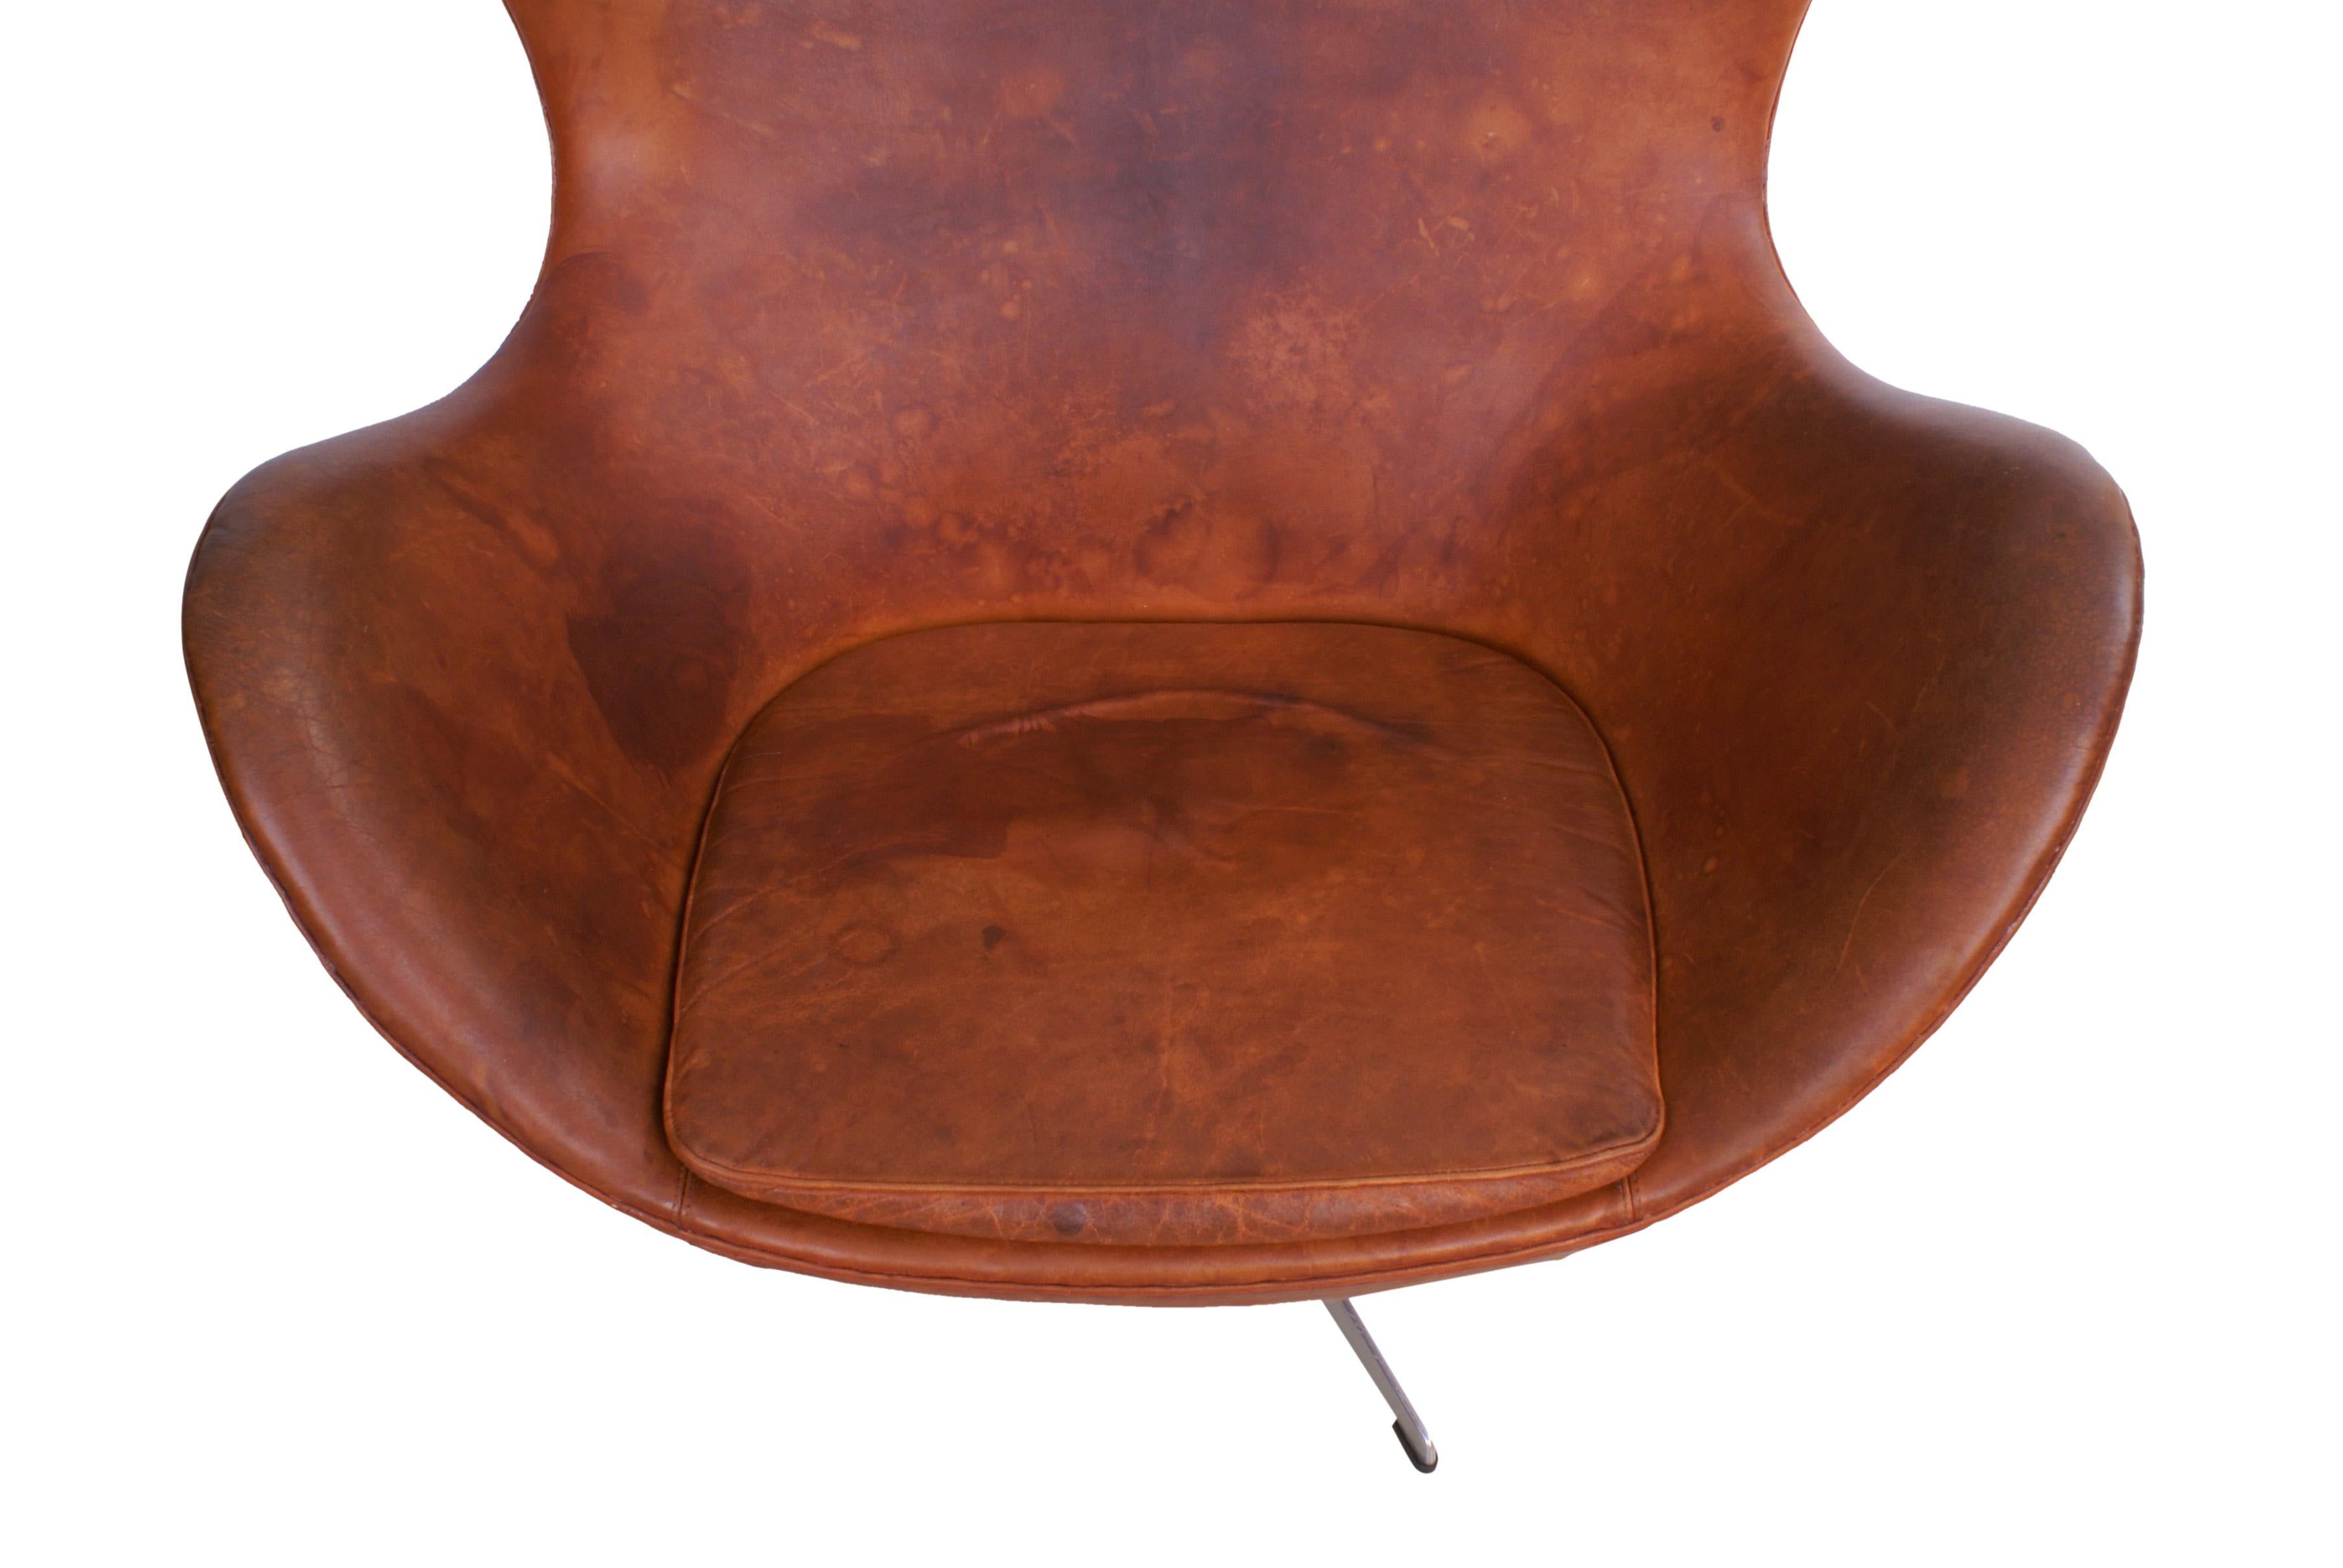 Scandinavian Modern Arne Jacobsen Early Egg Chair in Original Patinated Natural Leather, 1960s